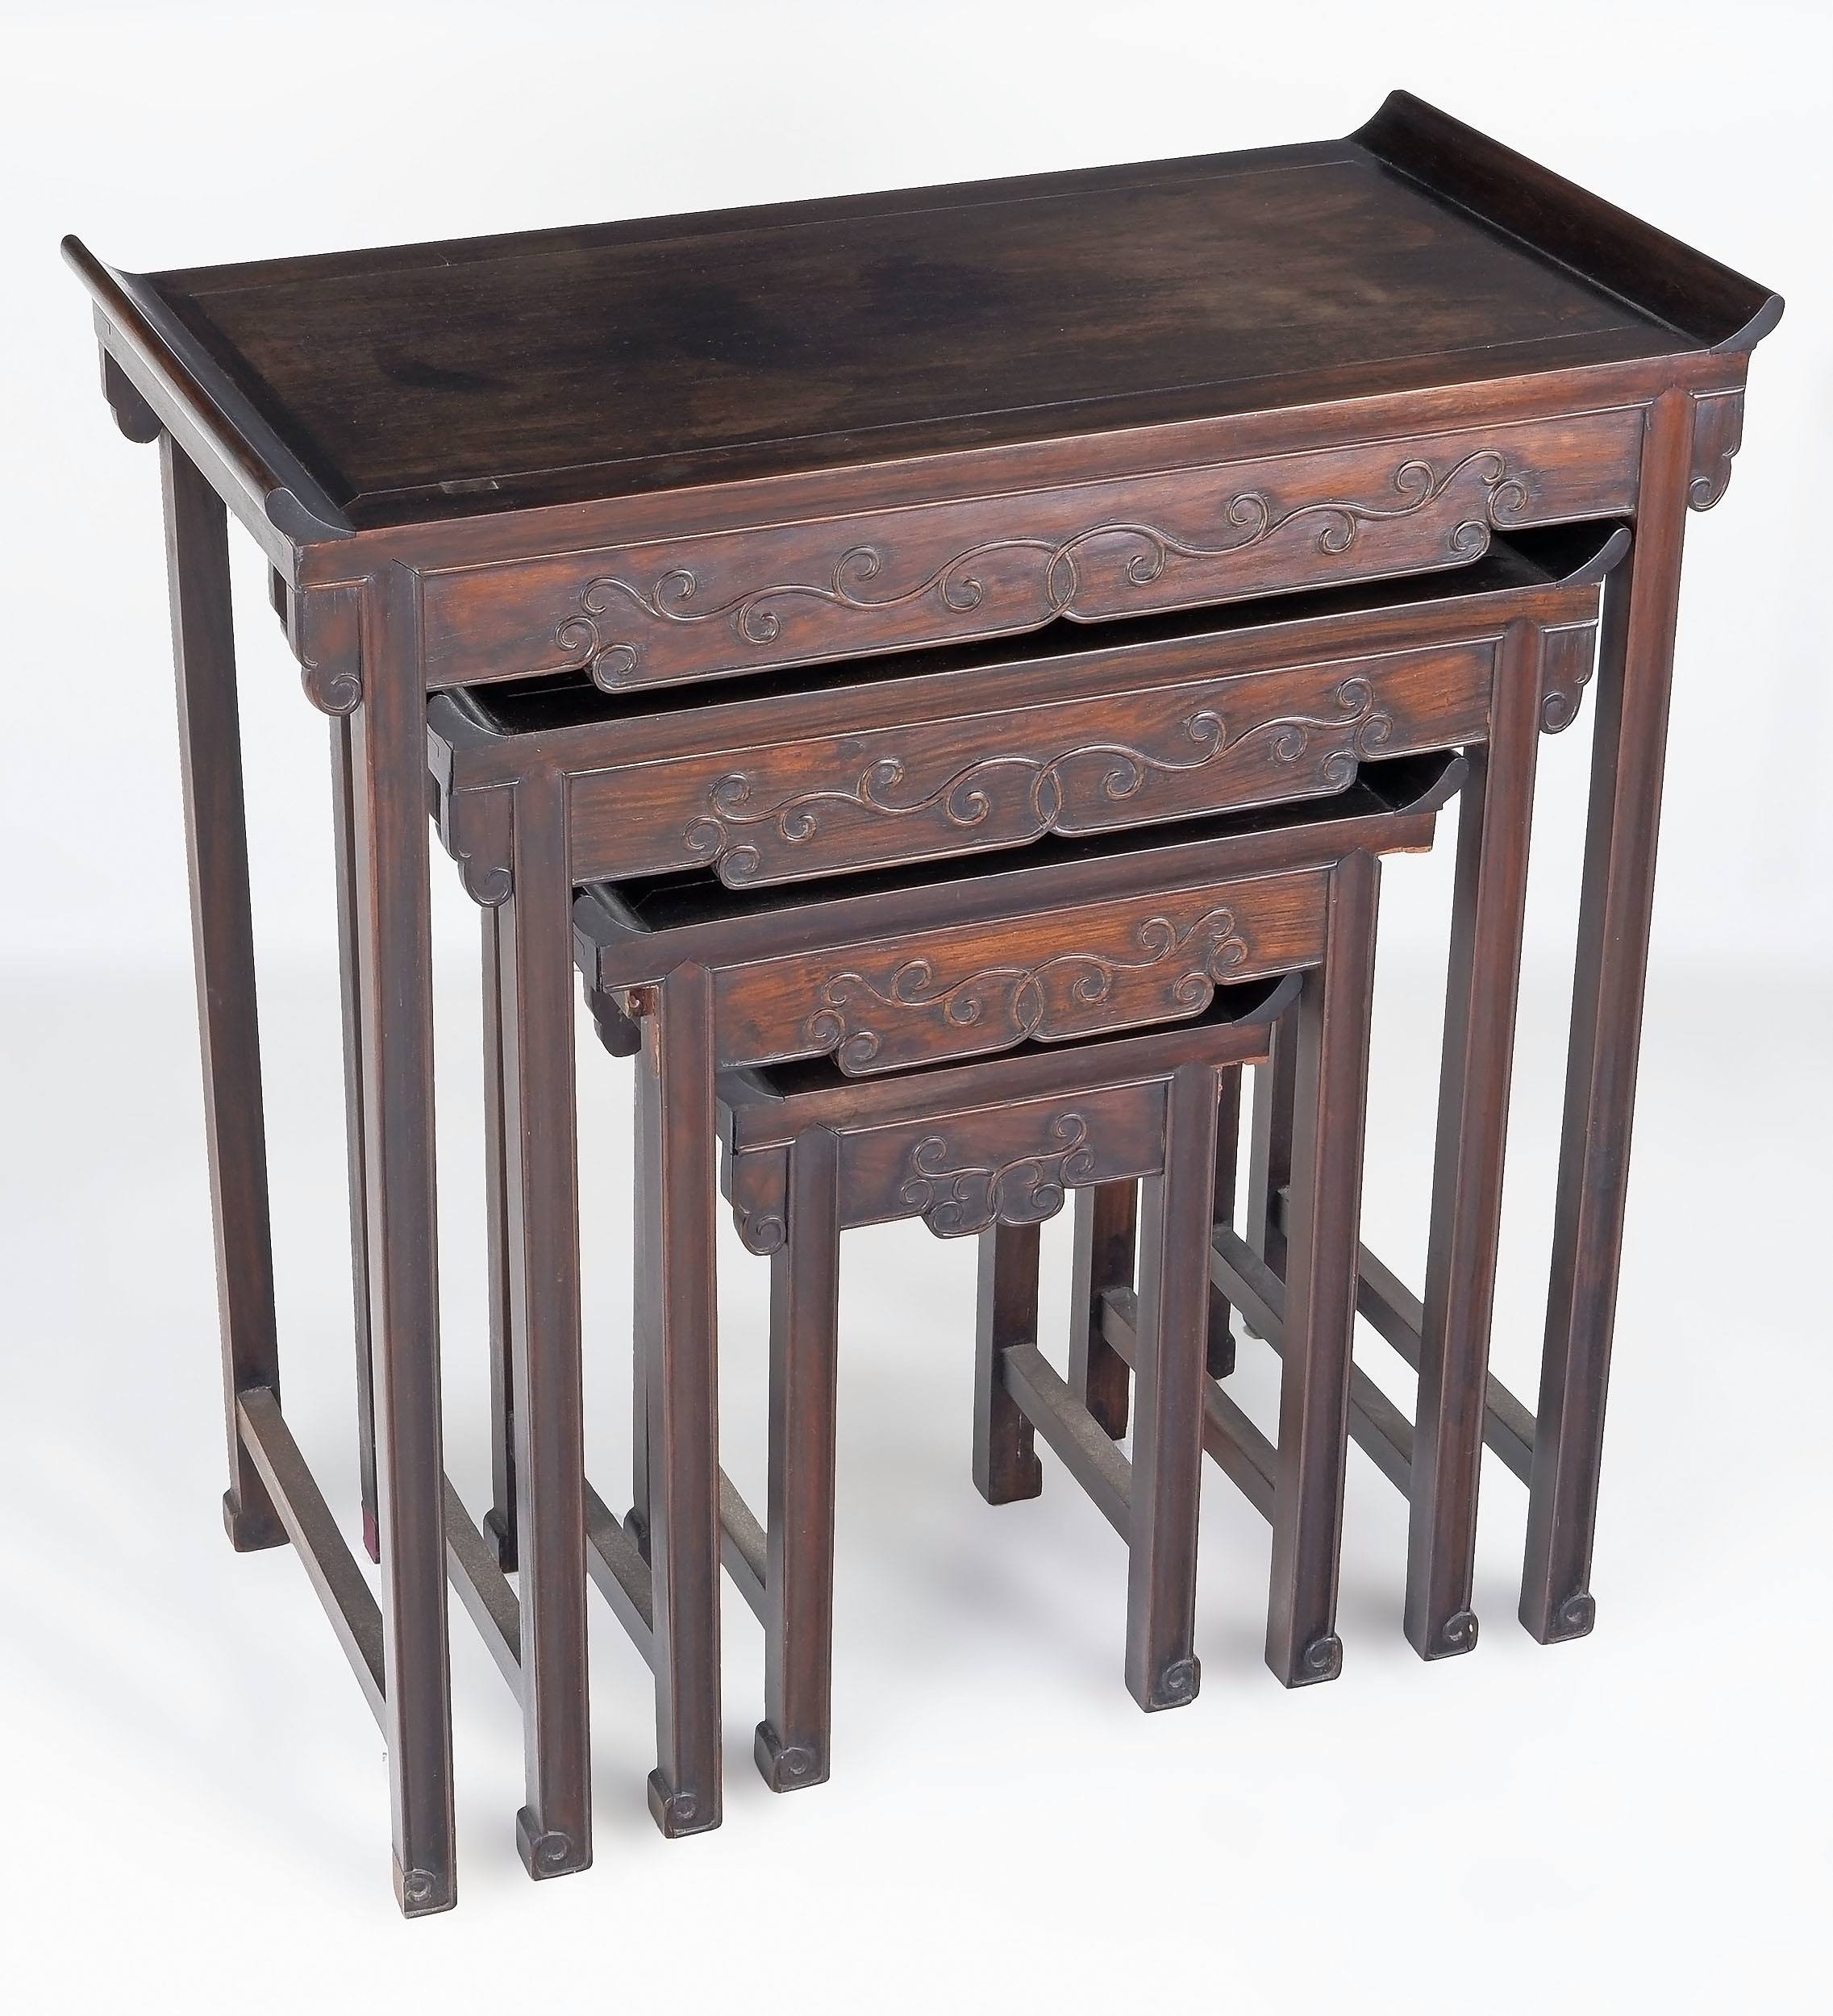 'Set of Four Chinese Rosewood Nesting Tables, Mid 20th Century'